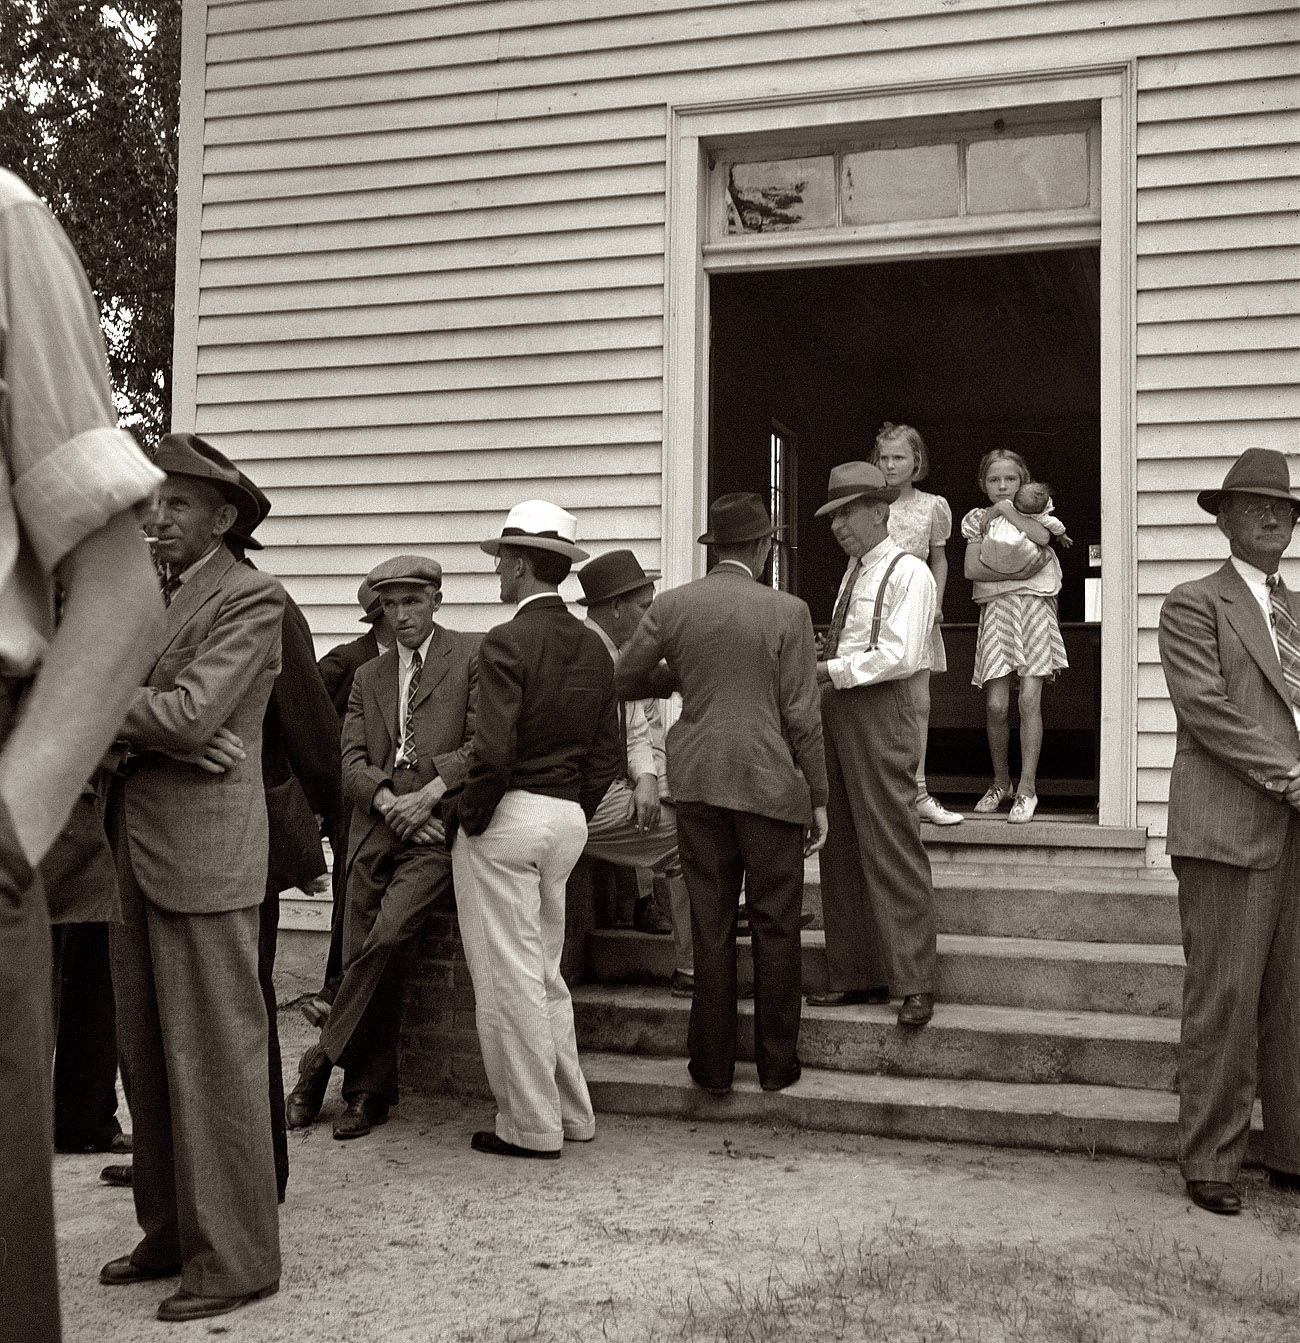 July 1939. "Congregation gathers after services to talk. Wheeley's [Wheeler's?] Church, Person County, North Carolina." View full size. Medium-format nitrate negative by Dorothea Lange for the Farm Security Administration.